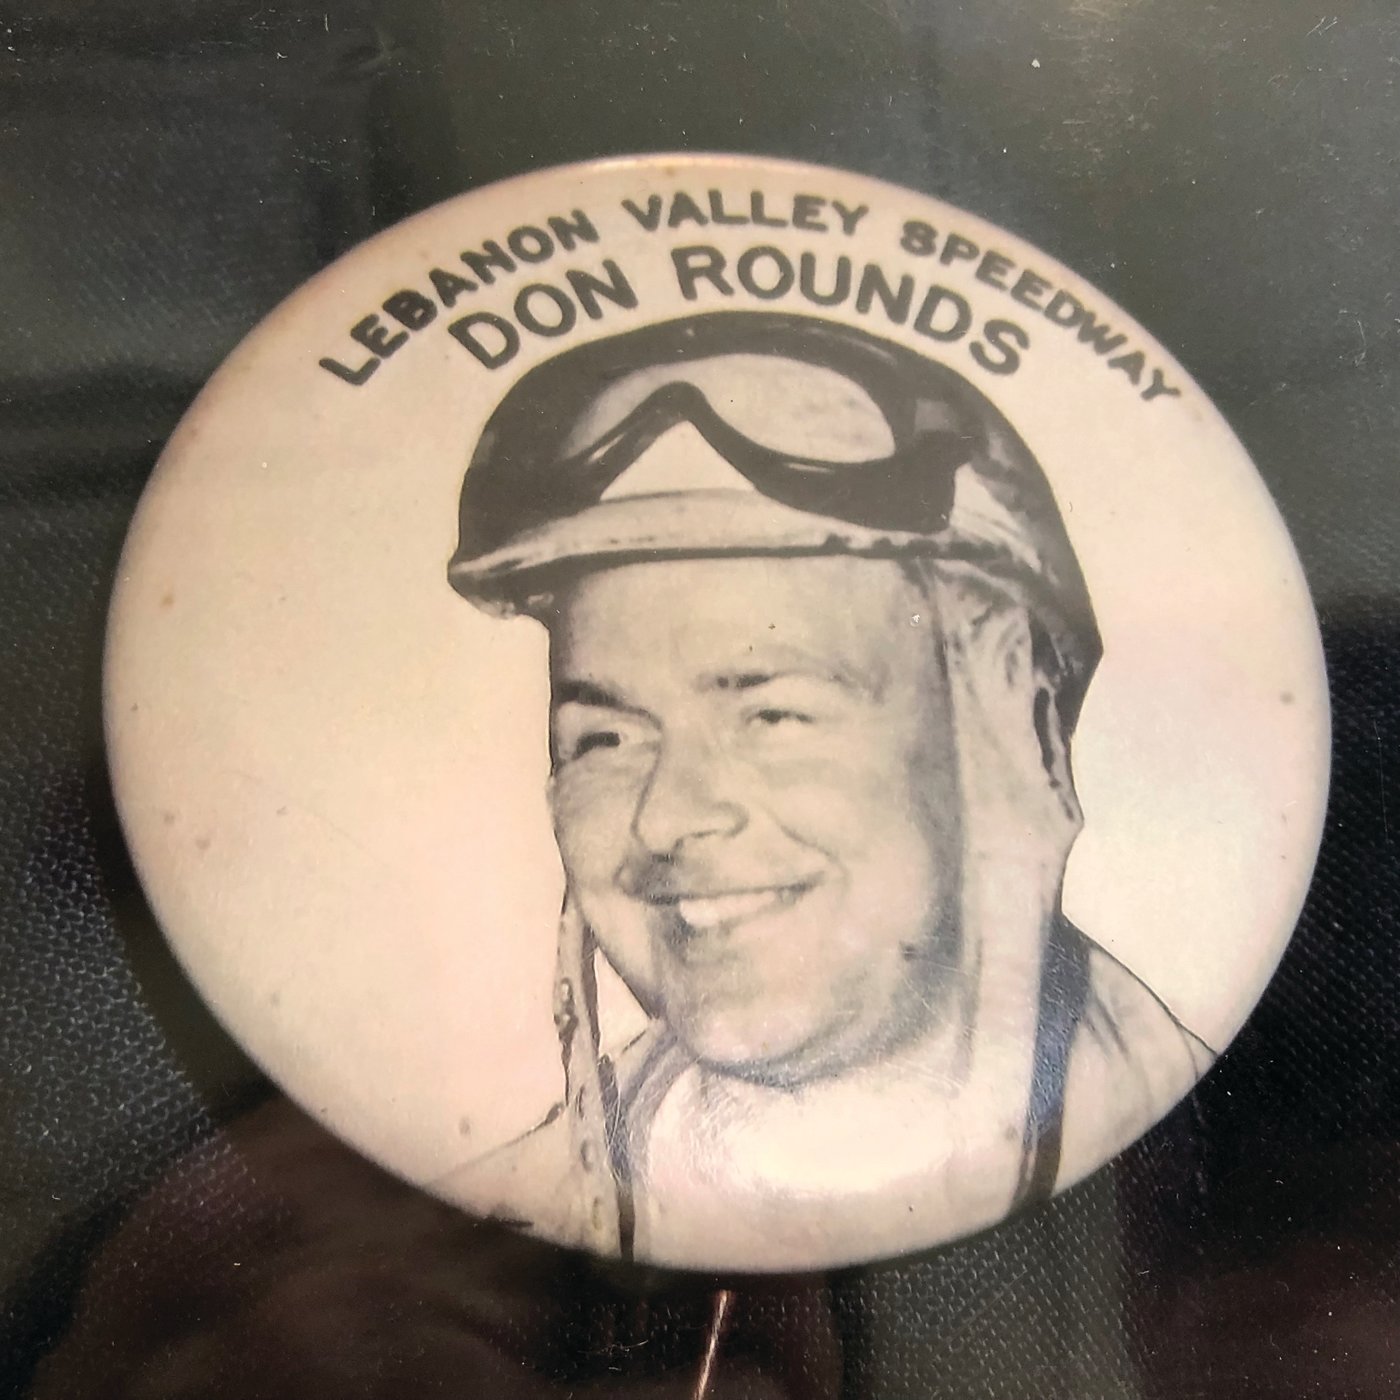 Souvenirs such as small plastic cars and this collectible Don Rounds button were available for purchase at the races.